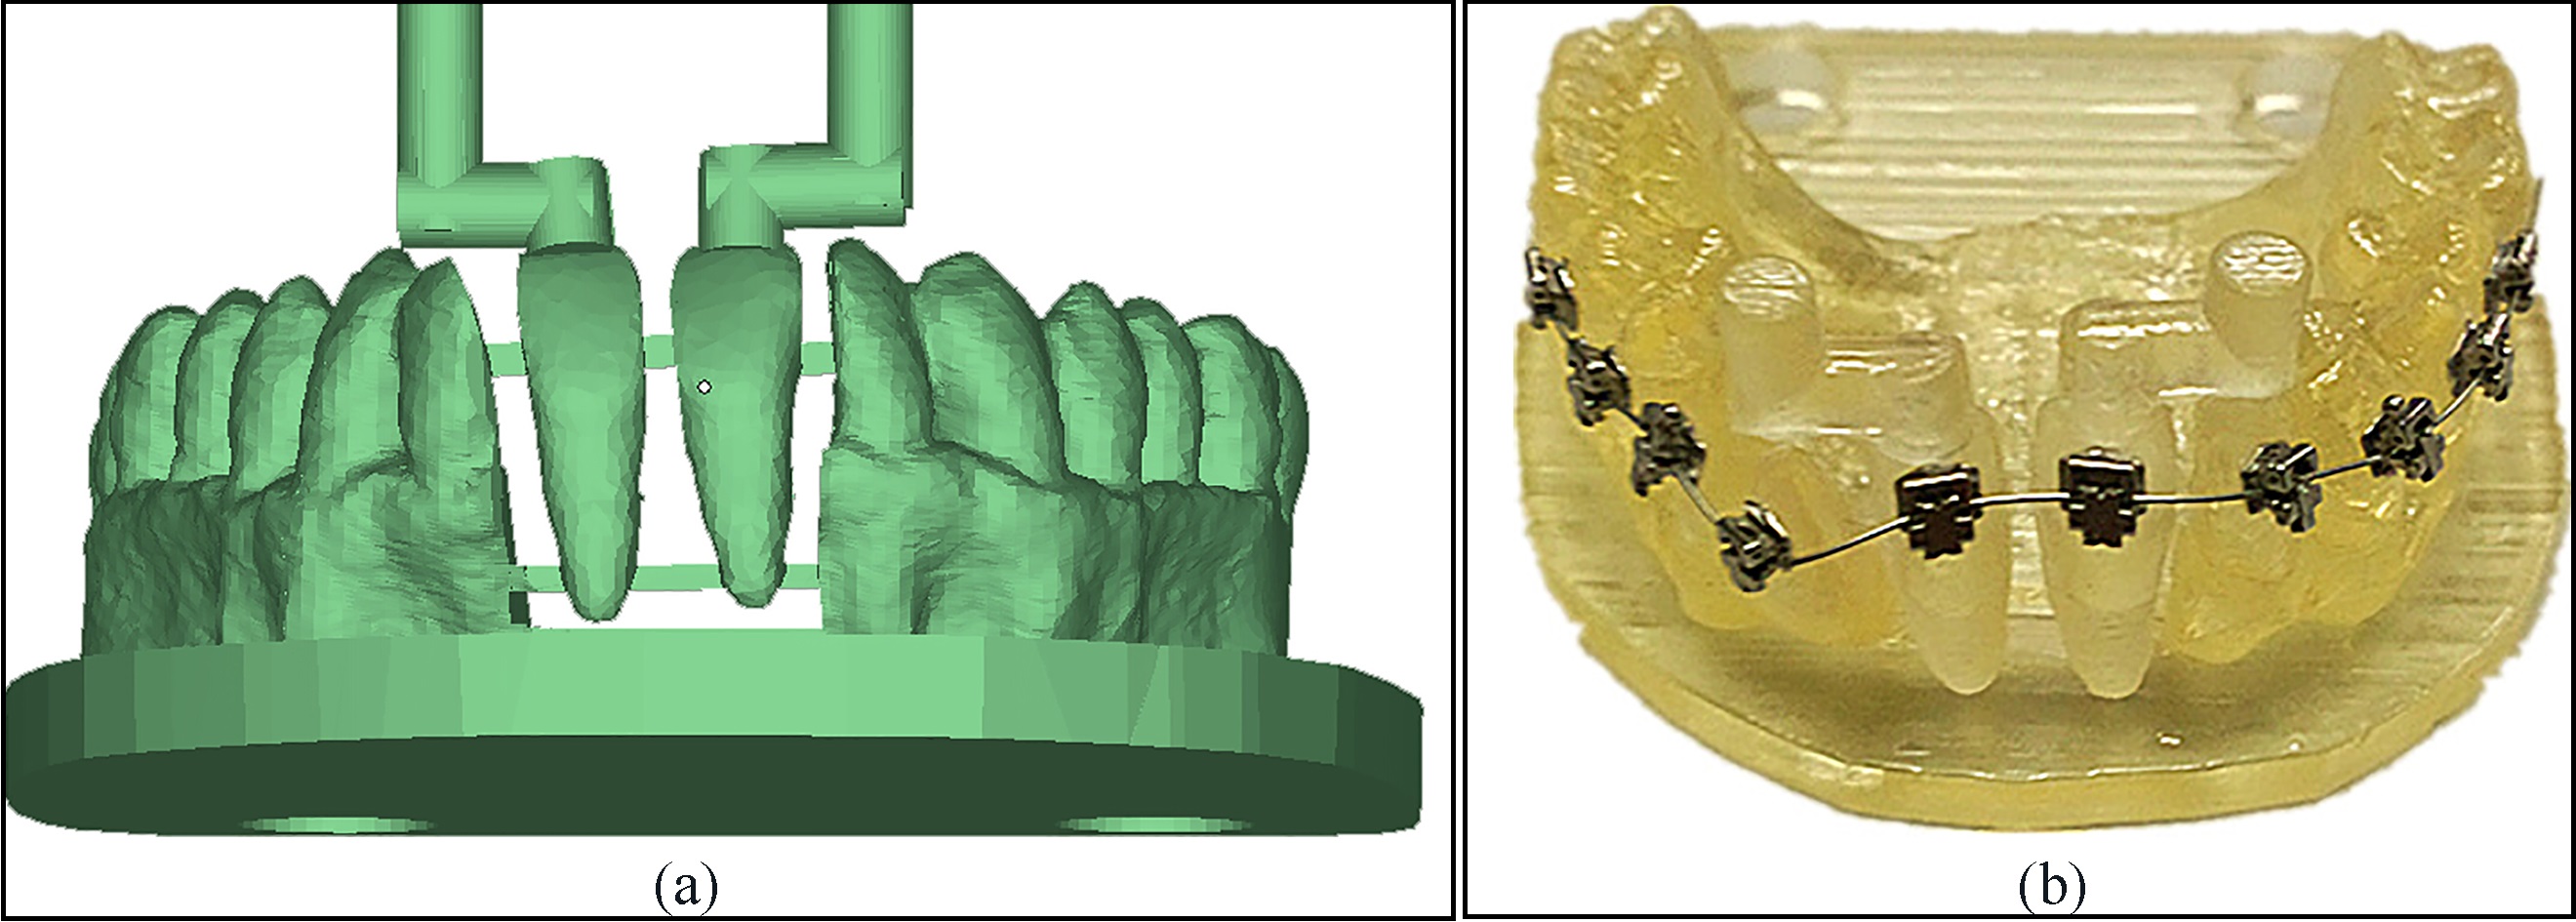 Simulated dental model, (a) digital model; (b) physical model assembled with brackets and archwire.